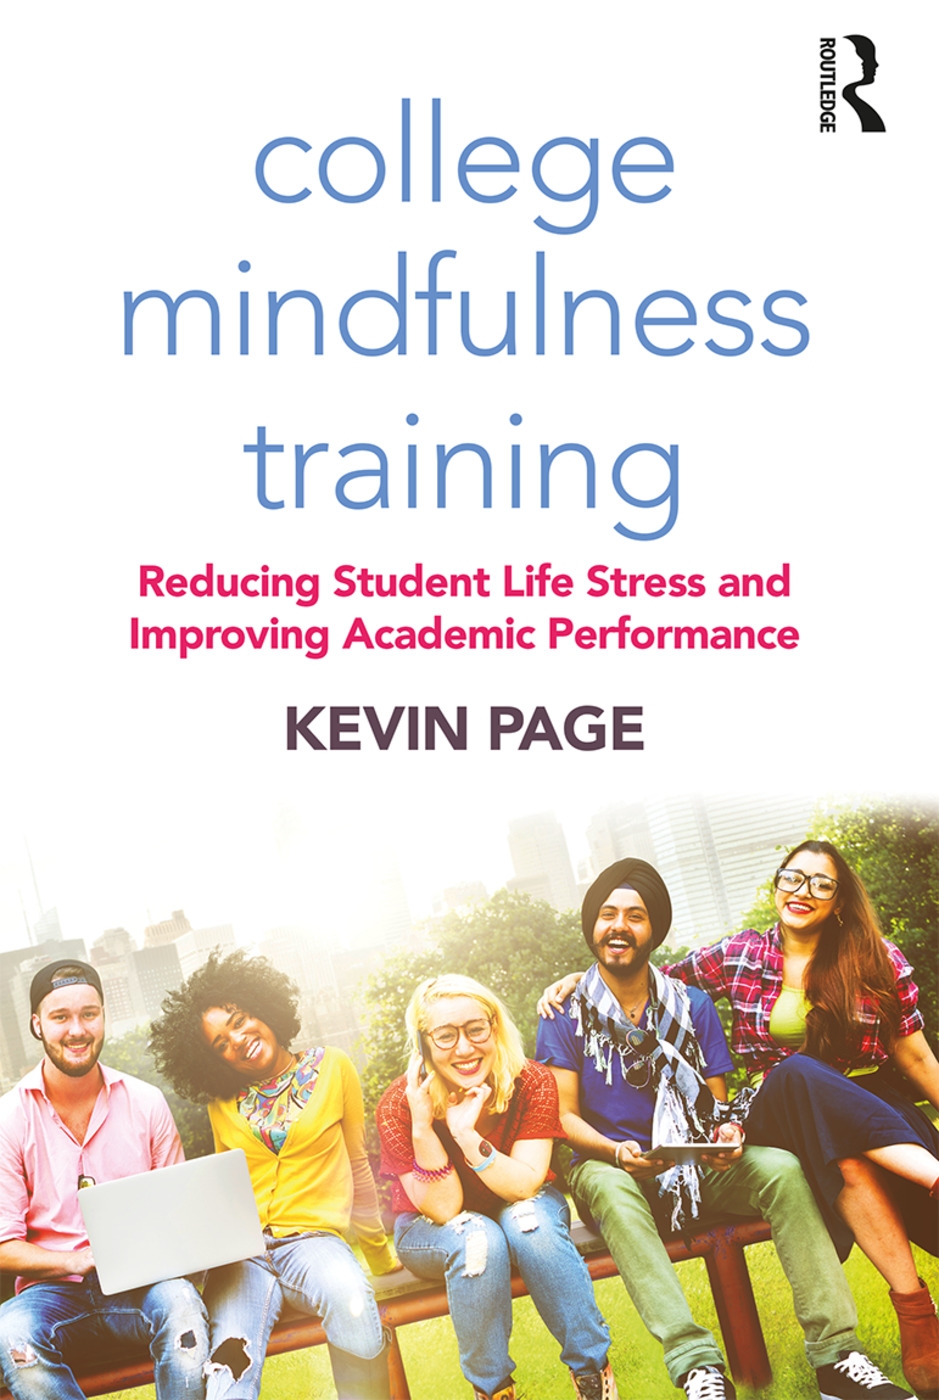 College Mindfulness Training: Reducing Student Life Stress and Improving Academic Performance